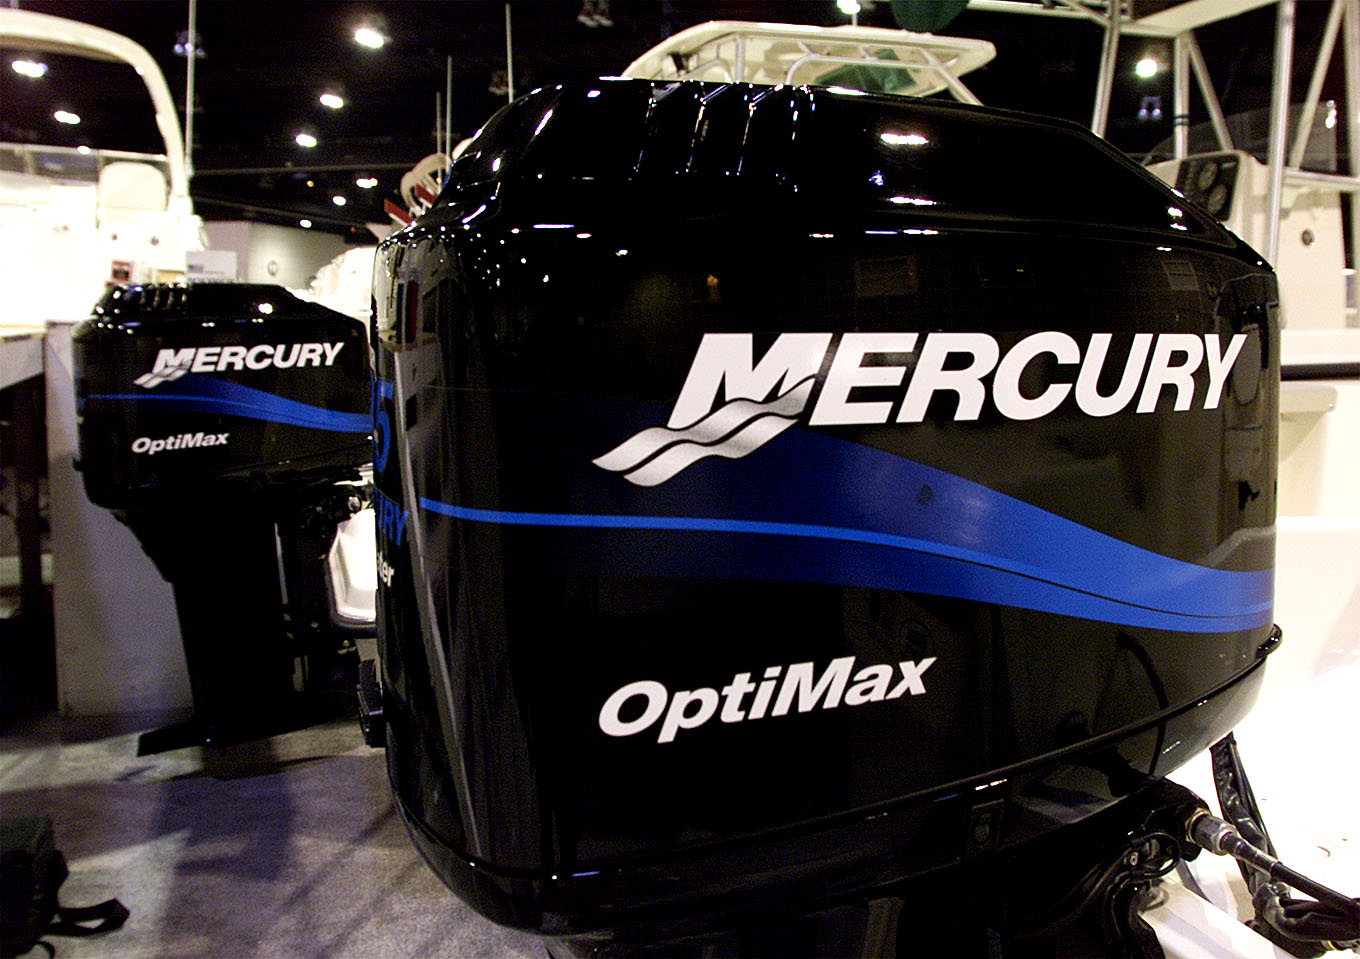 Mercury outboard motors on display at a boat show